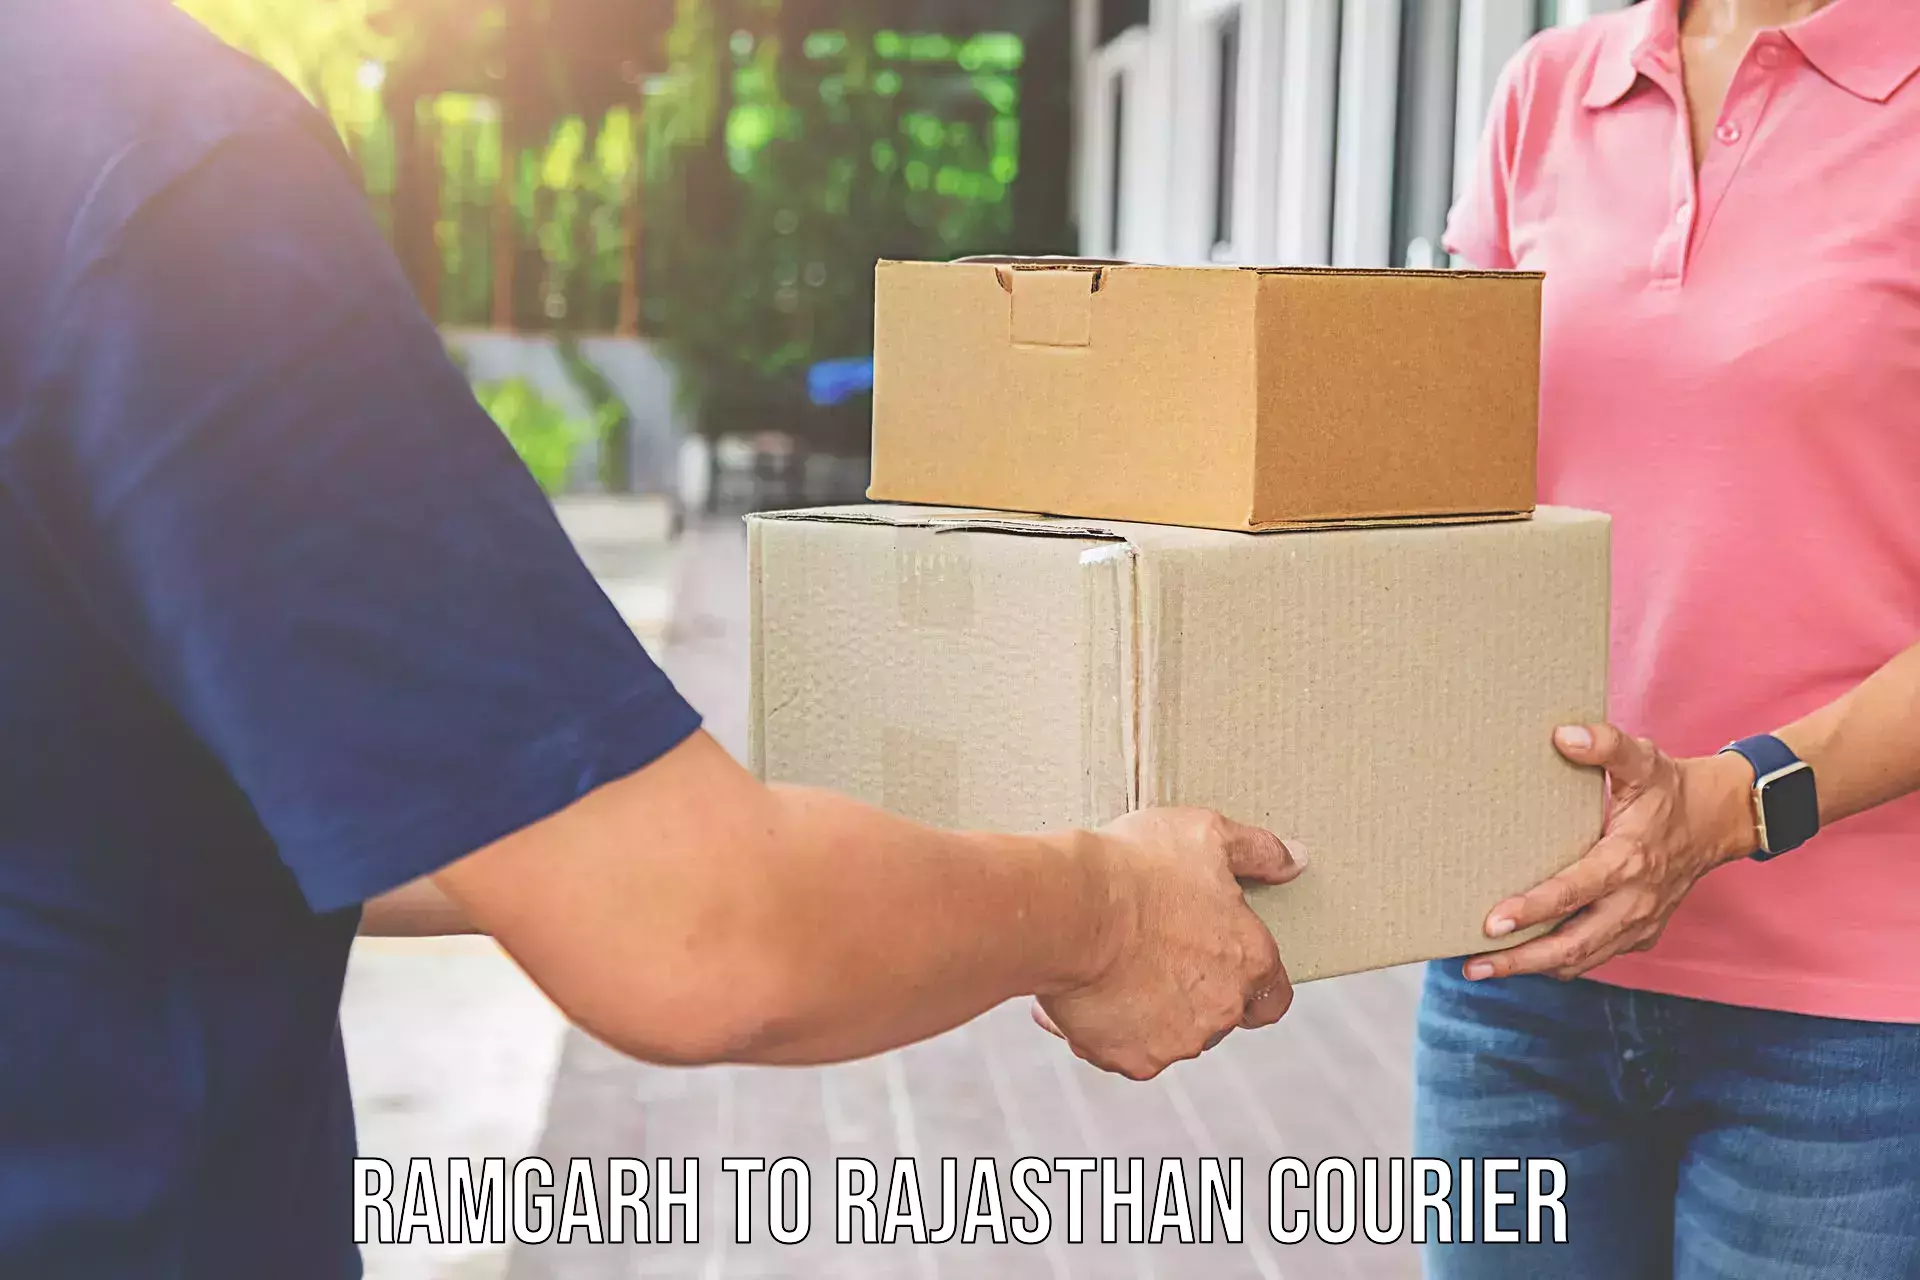 Quality relocation services Ramgarh to Udaipurwati